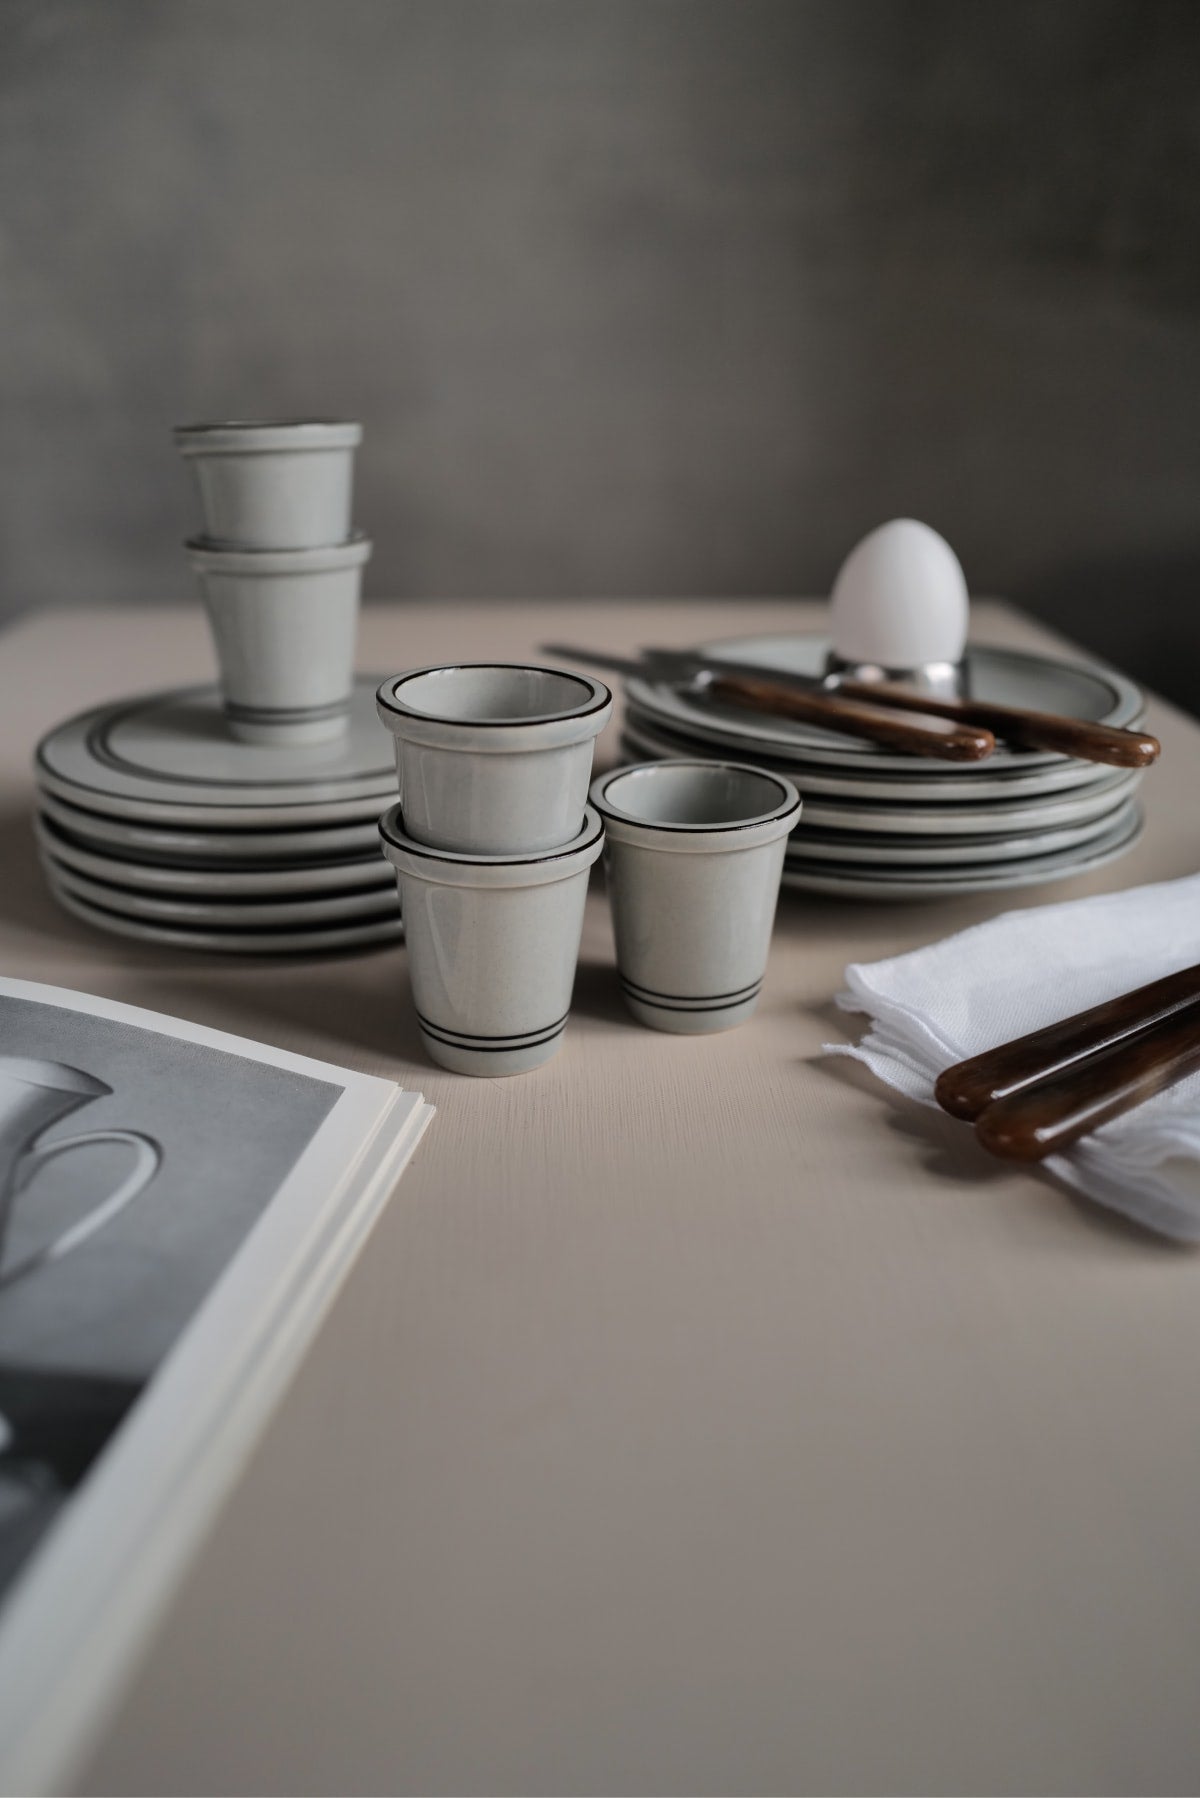 B&G Stoneware Tableware Set and Details